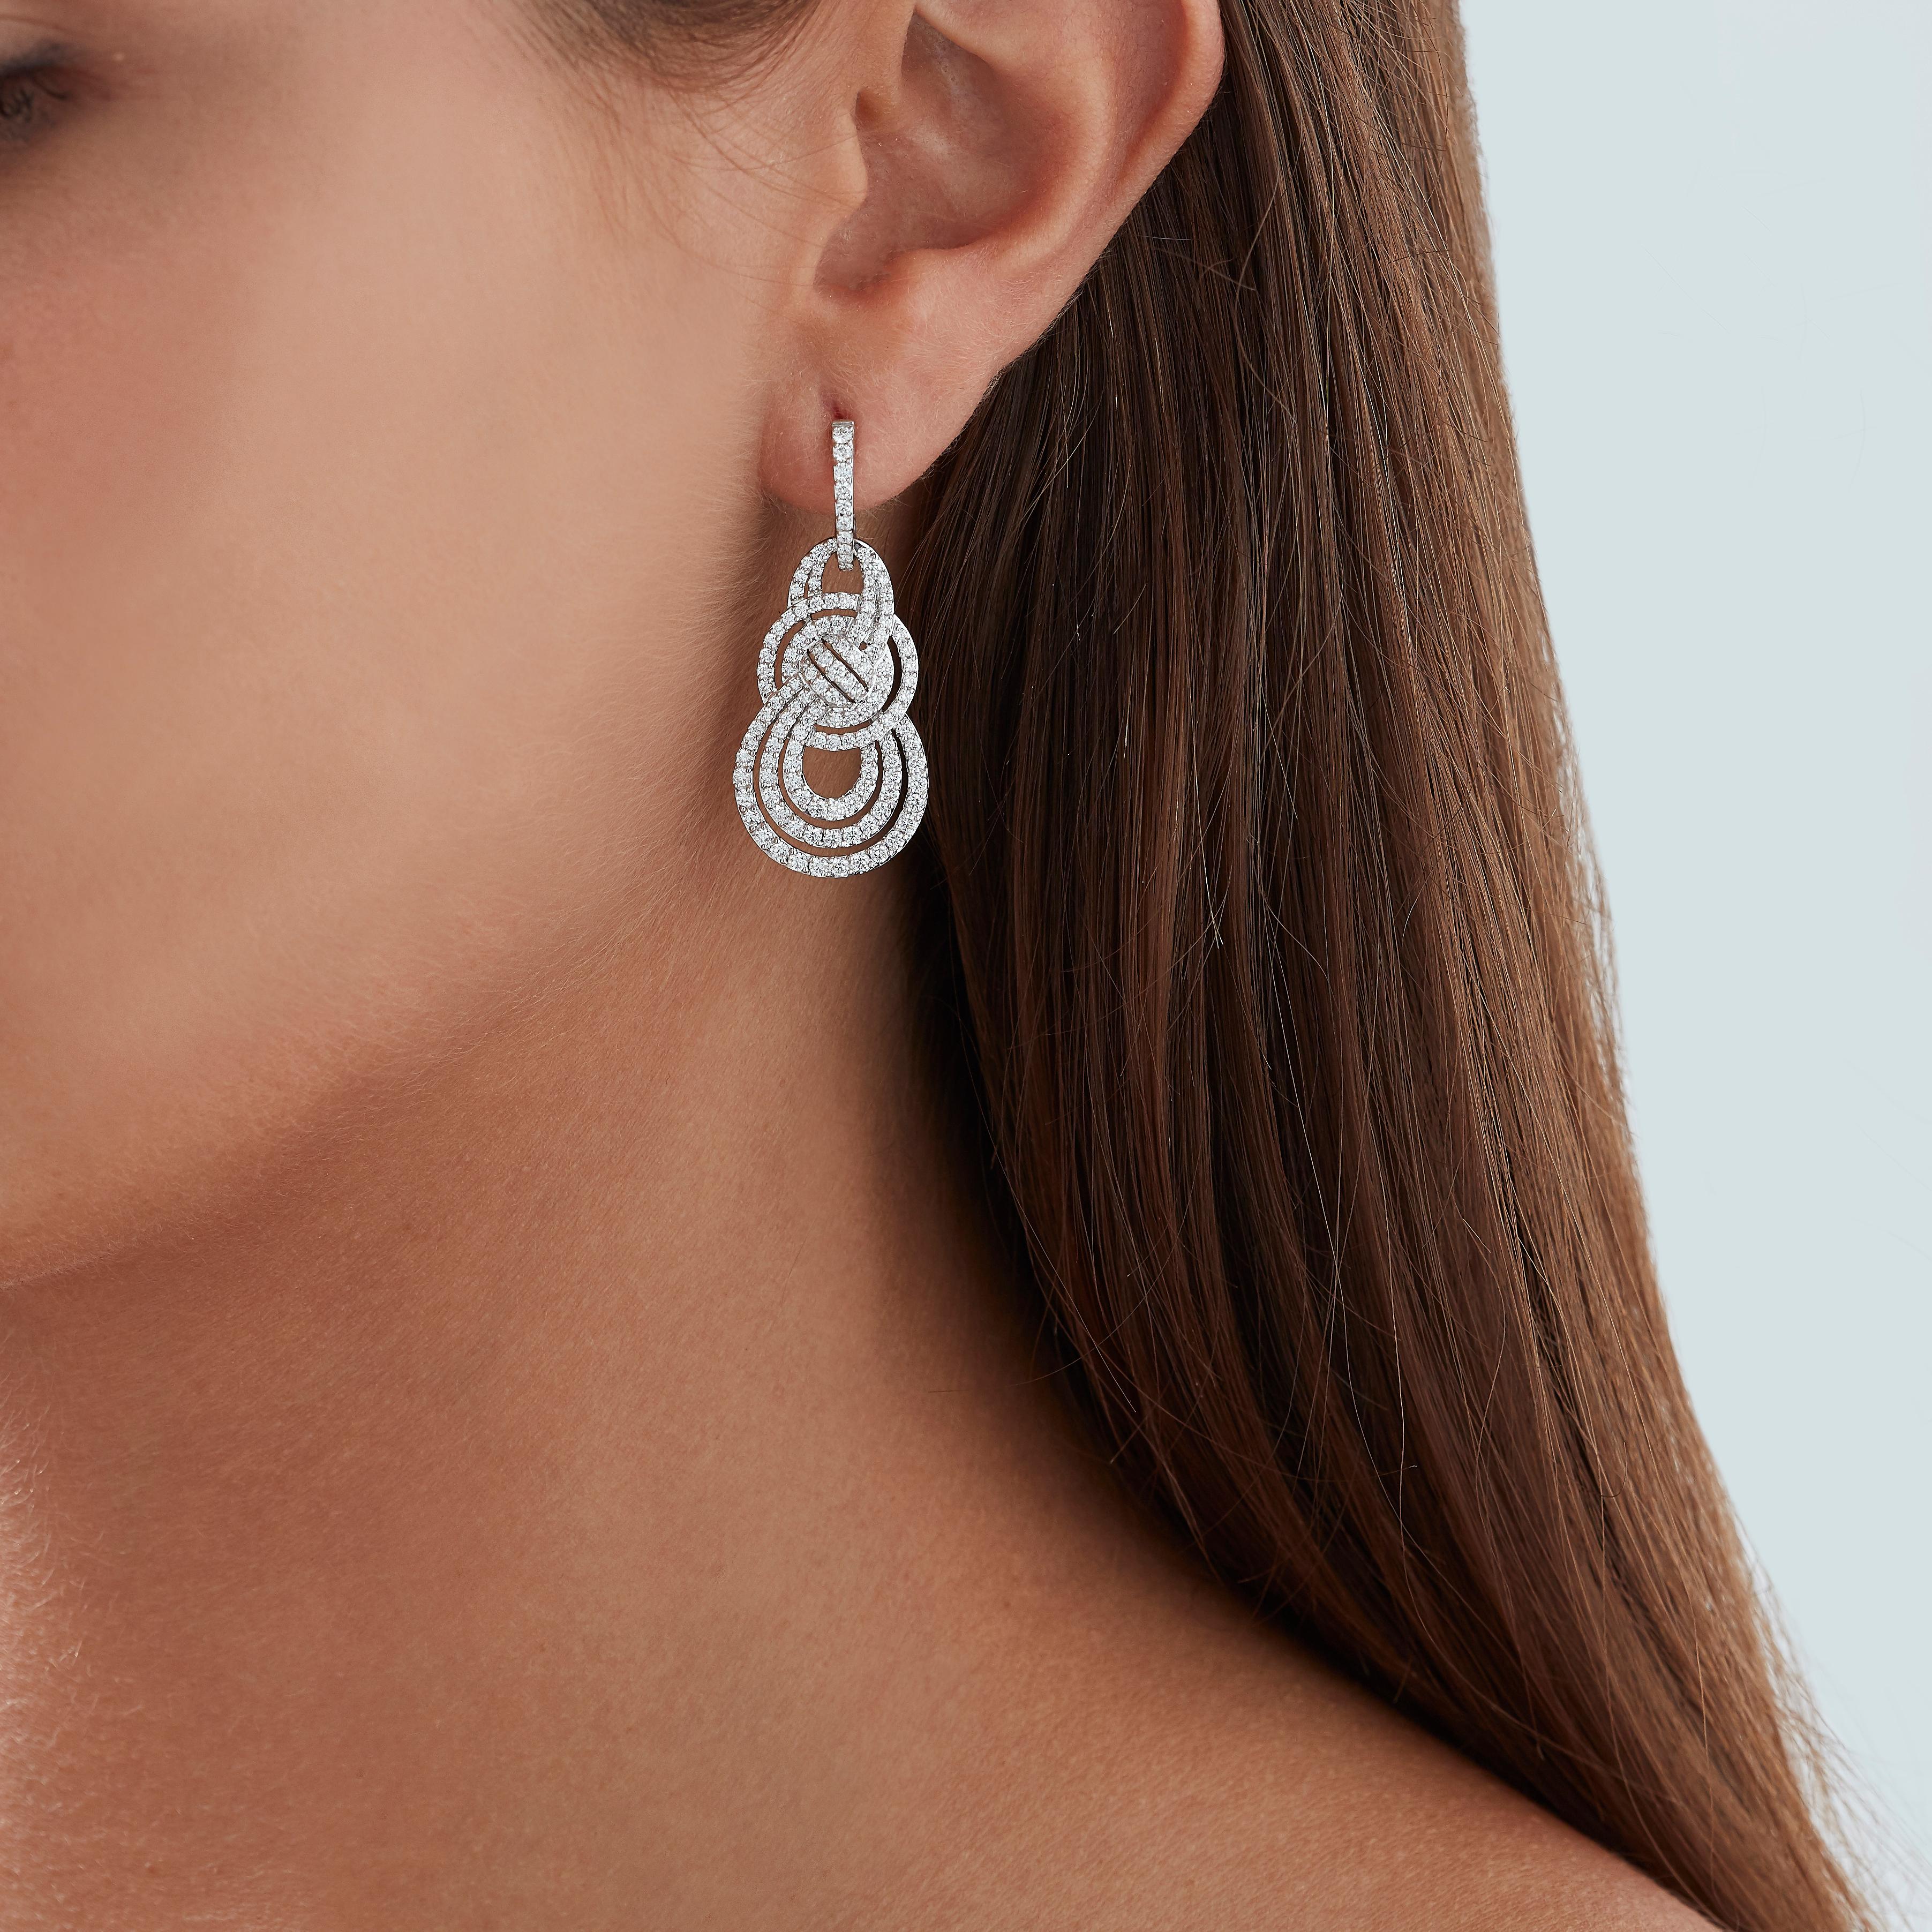  A House of Garrard pair of 18 karat white gold medium double knot earrings from the Entanglement collection set with round white diamonds.

276 round white diamonds weighing 2.09cts
Total diamond weight: 2.09cts                                     